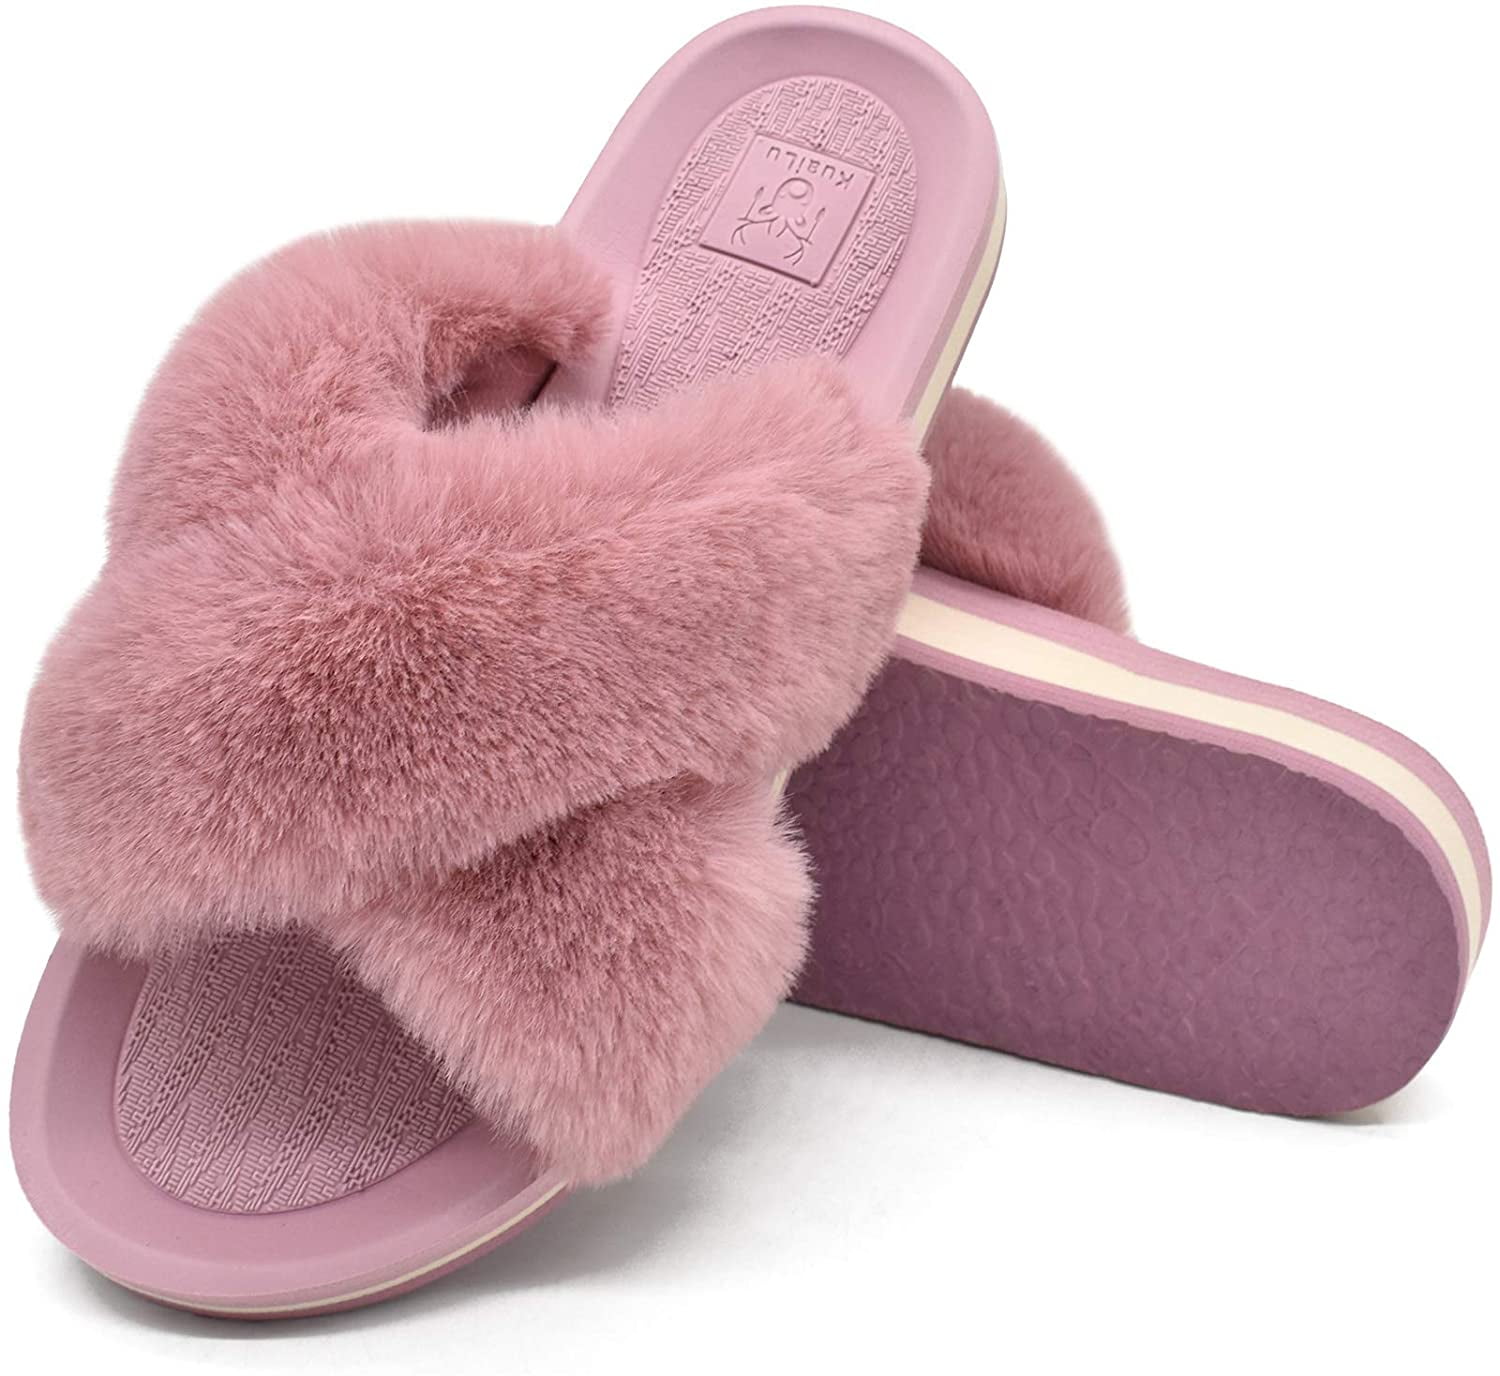 KuaiLu Womens Fluffy Faux Fur Sliders Slippers Open Toe Fuzzy Plush Cosy House Slippers Ladies with Arch Support Non-Slip Hard Rubber Sole 